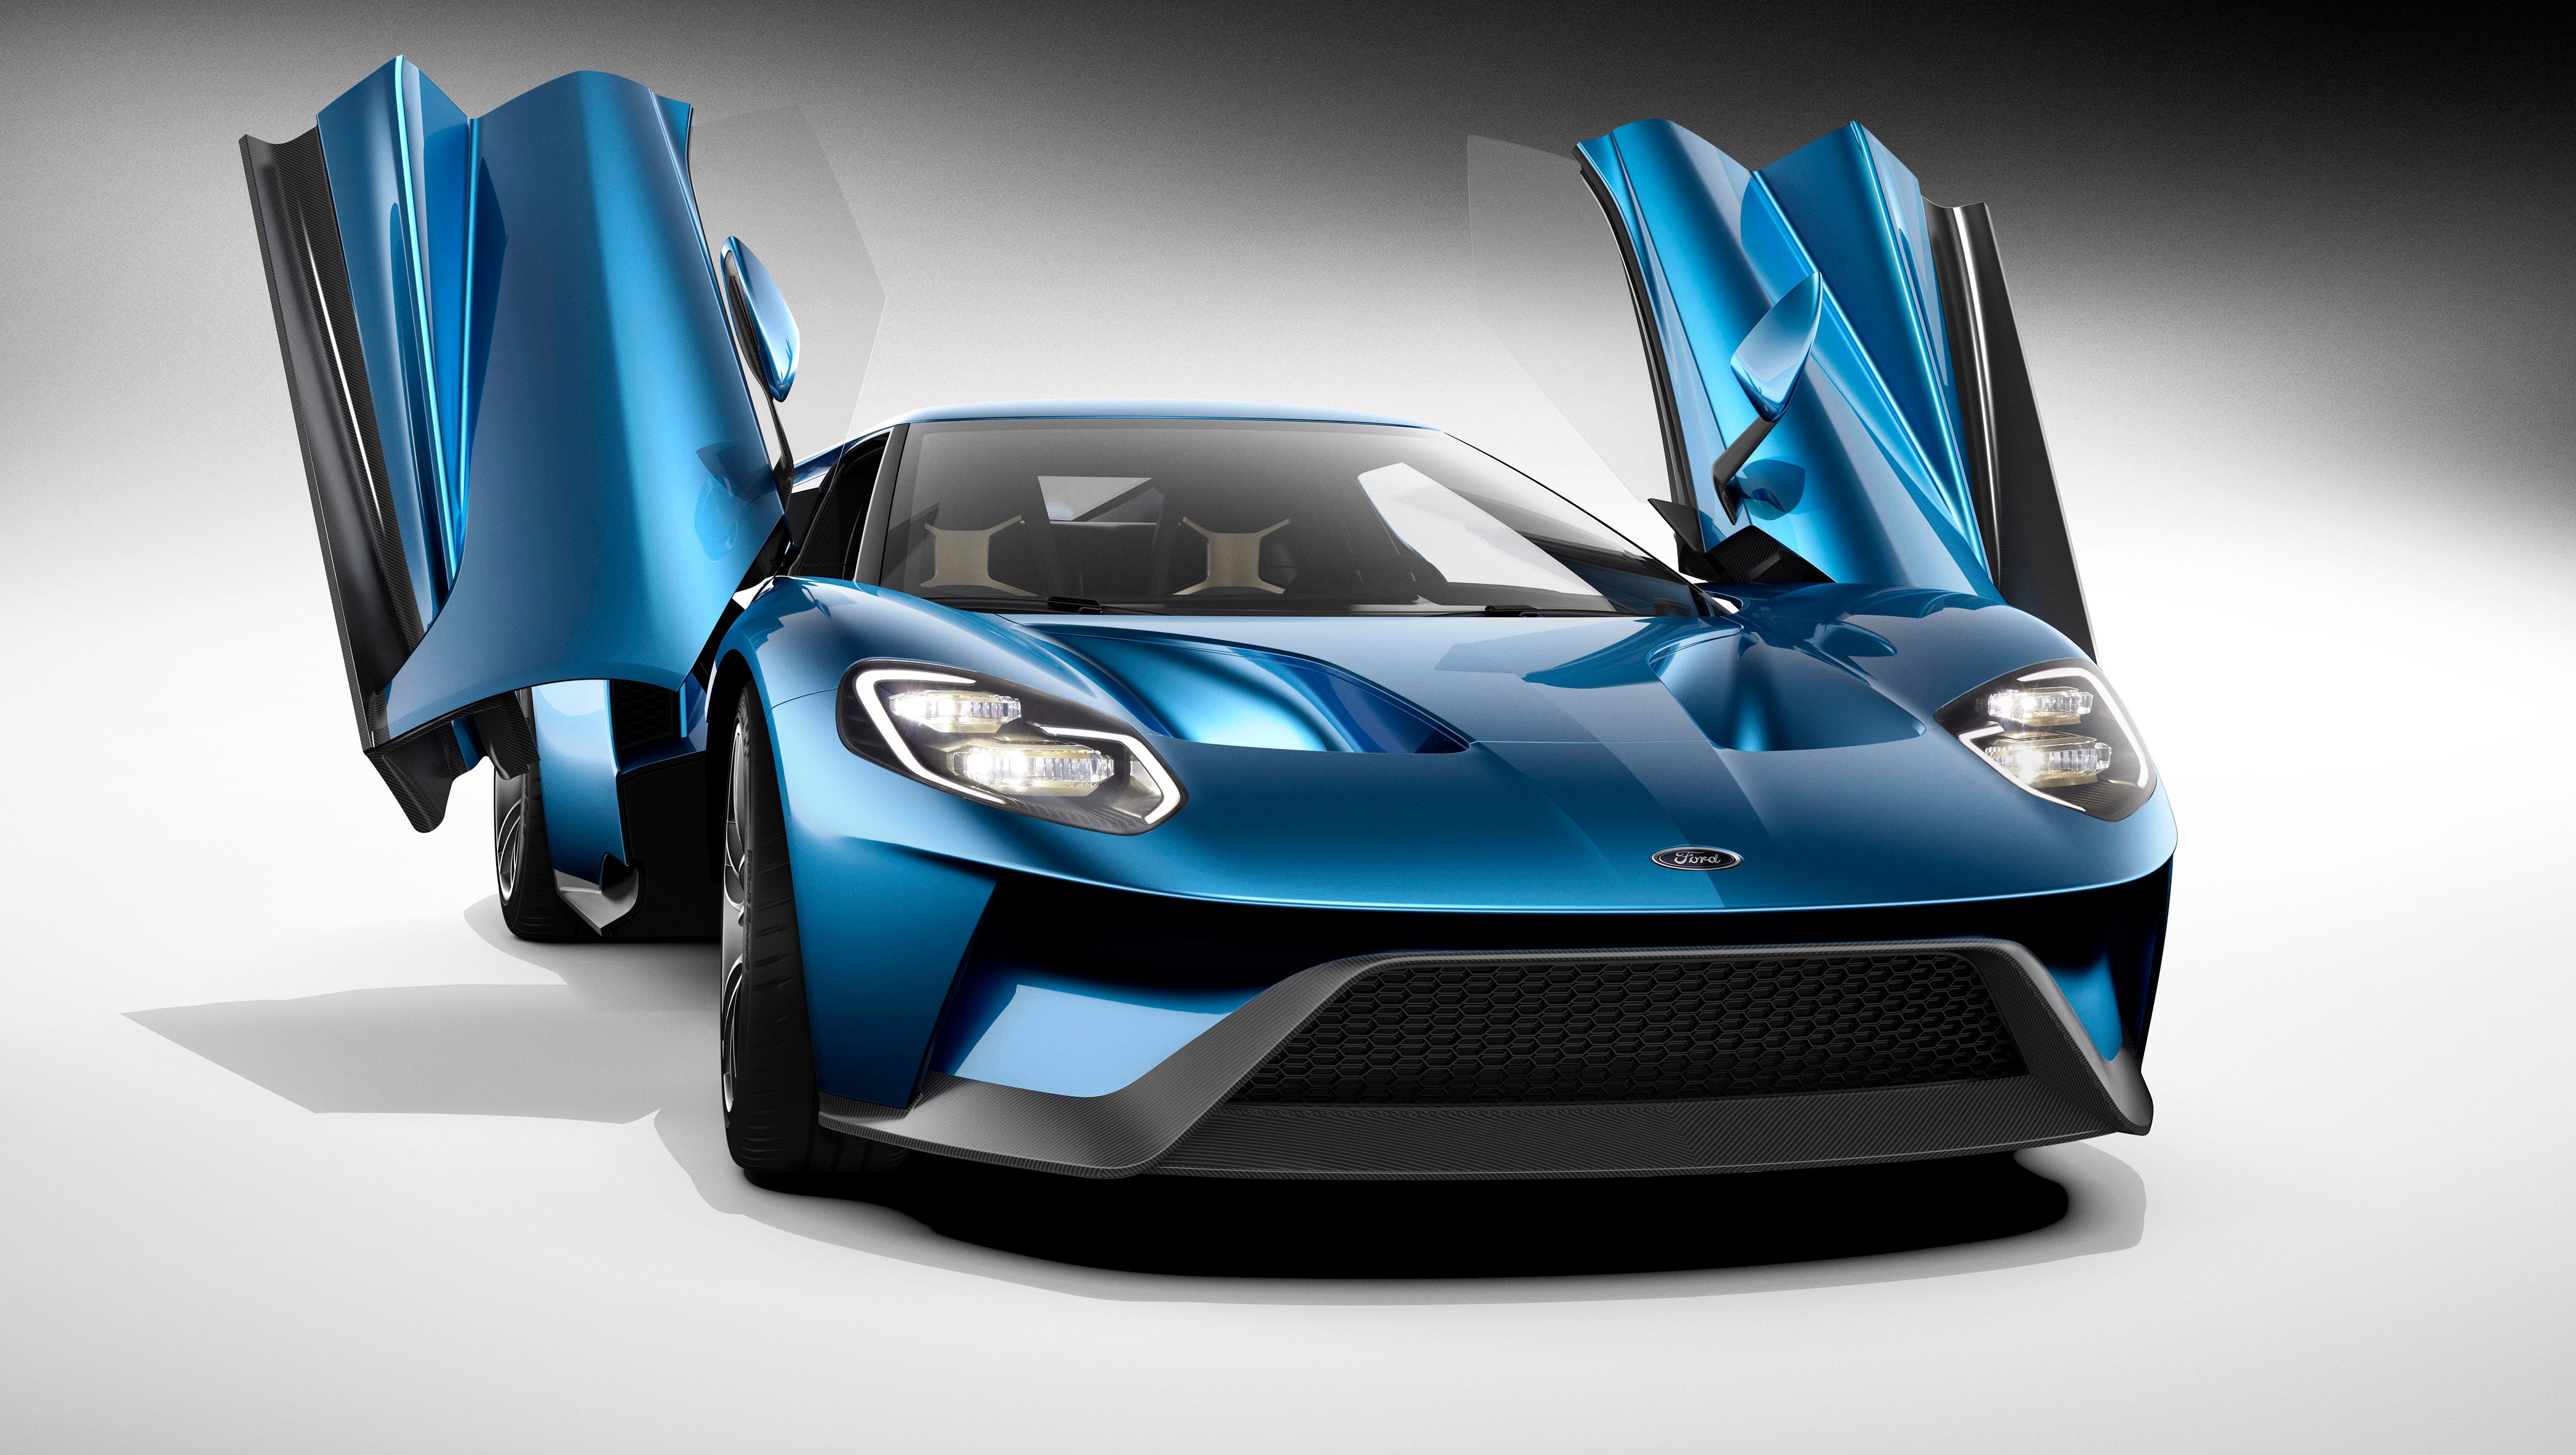 The interior on the  two-seat, carbon-fiber, mid-engined Ford GT supercar is accessed by upward-swinging doors.